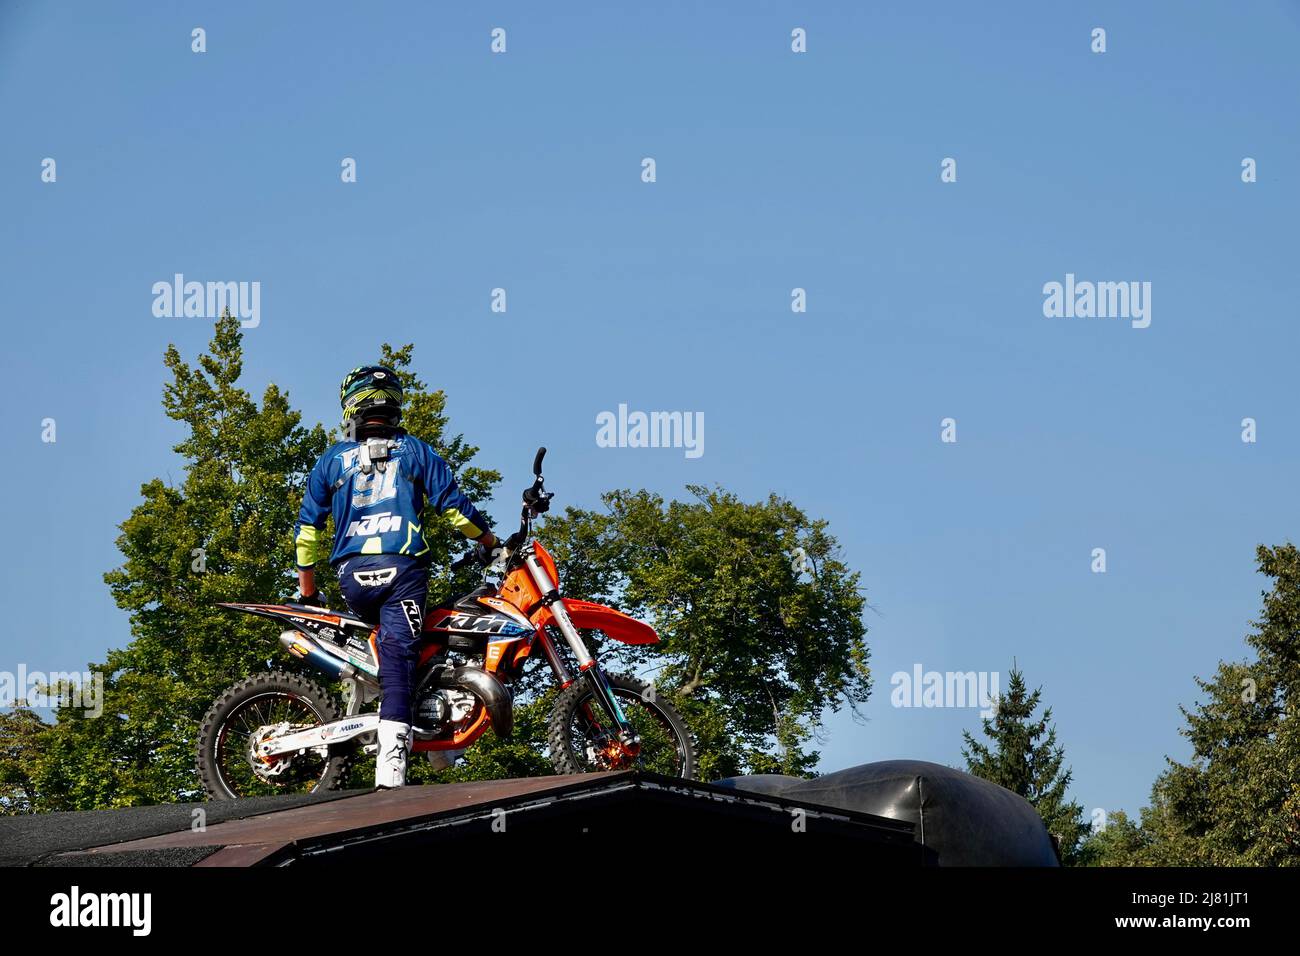 Prague, Czech Republic - September 4 2021: Motocross rider in a blue jumpsuit with a helmet sitting on his motorcycle at the top of the jumping ramp. Stock Photo